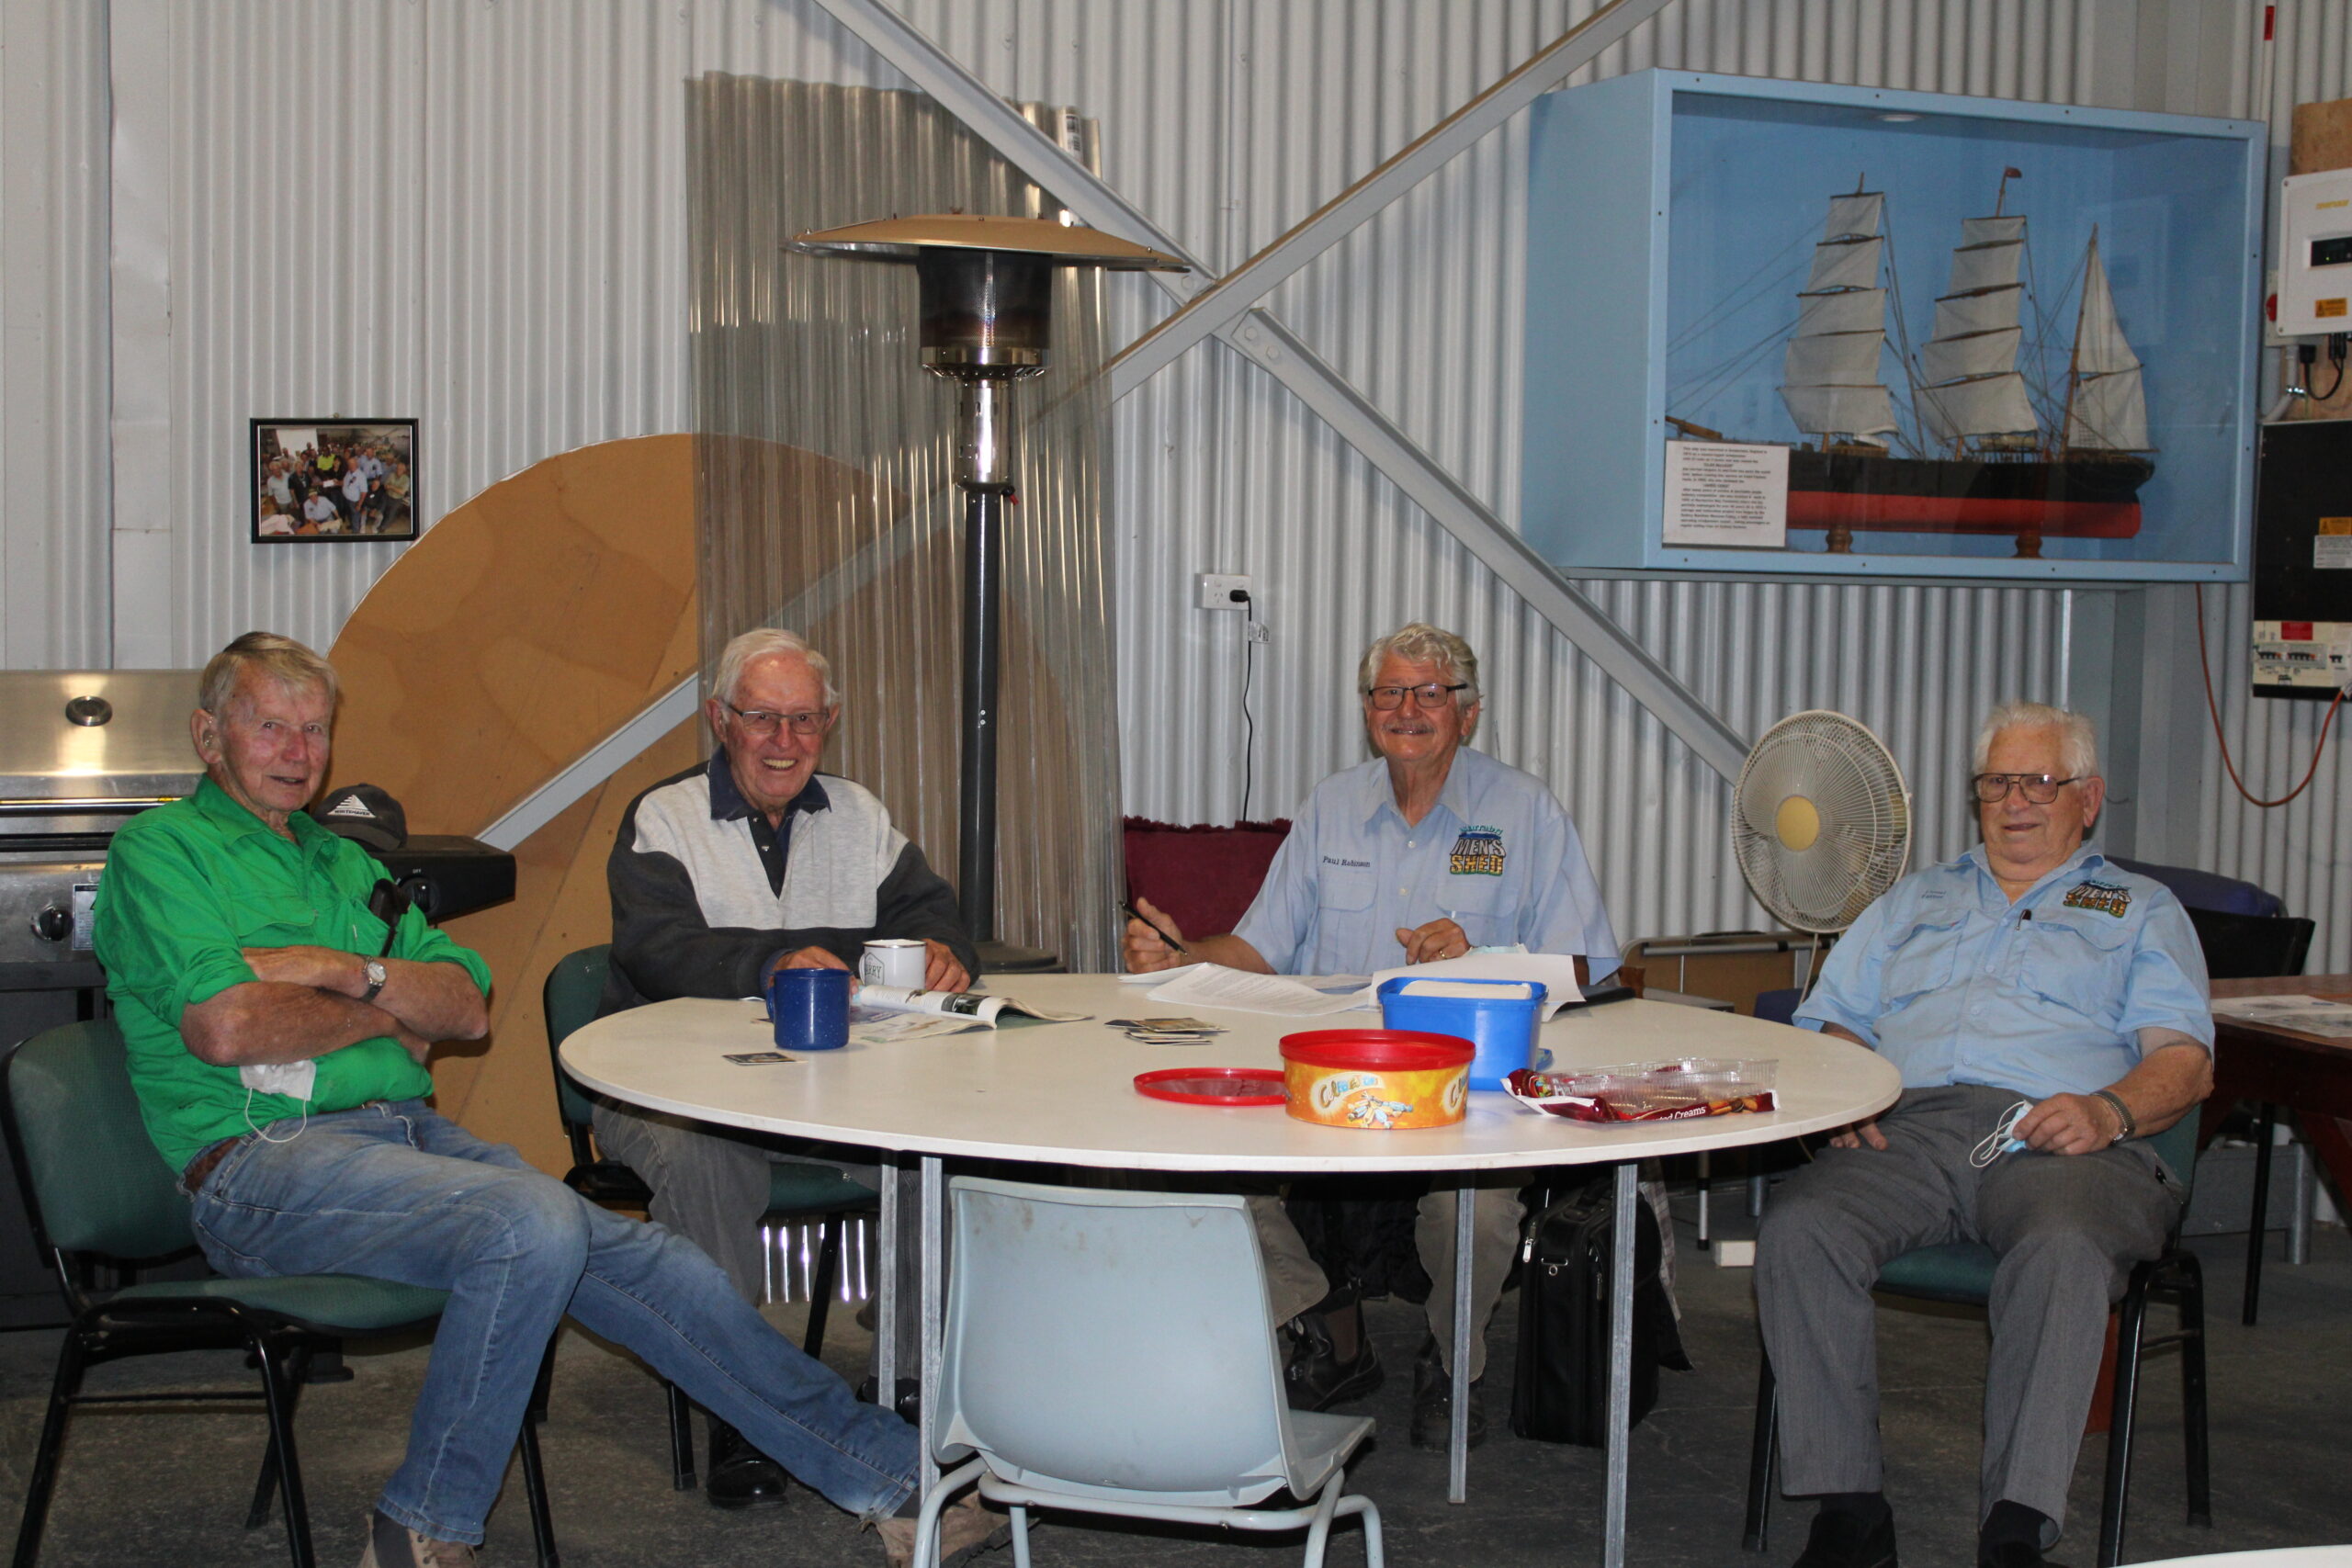 John Melbourne, Barry Shepherd, Paul Robinson and Lionel Palmer gathered around for tea and coffee at the Men’s Shed.